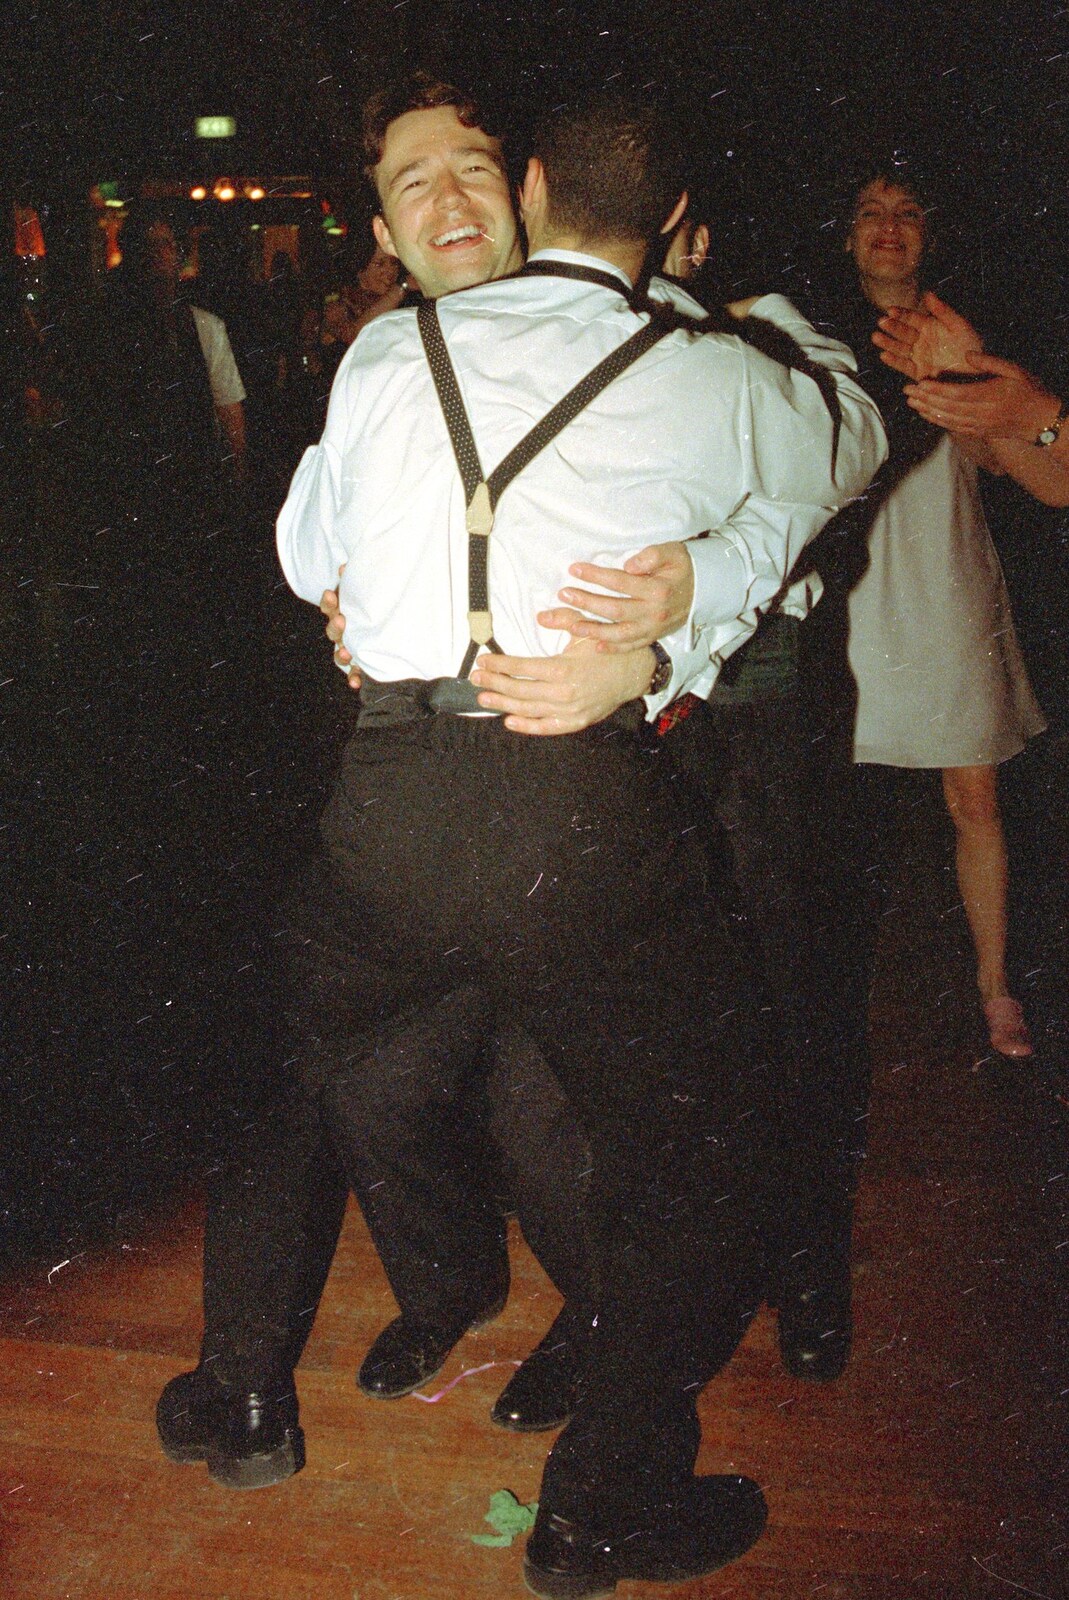 Tim and Orhan share a hug from CISU at the Suffolk College May Ball, Ipswich, Suffolk - 11th May 1997